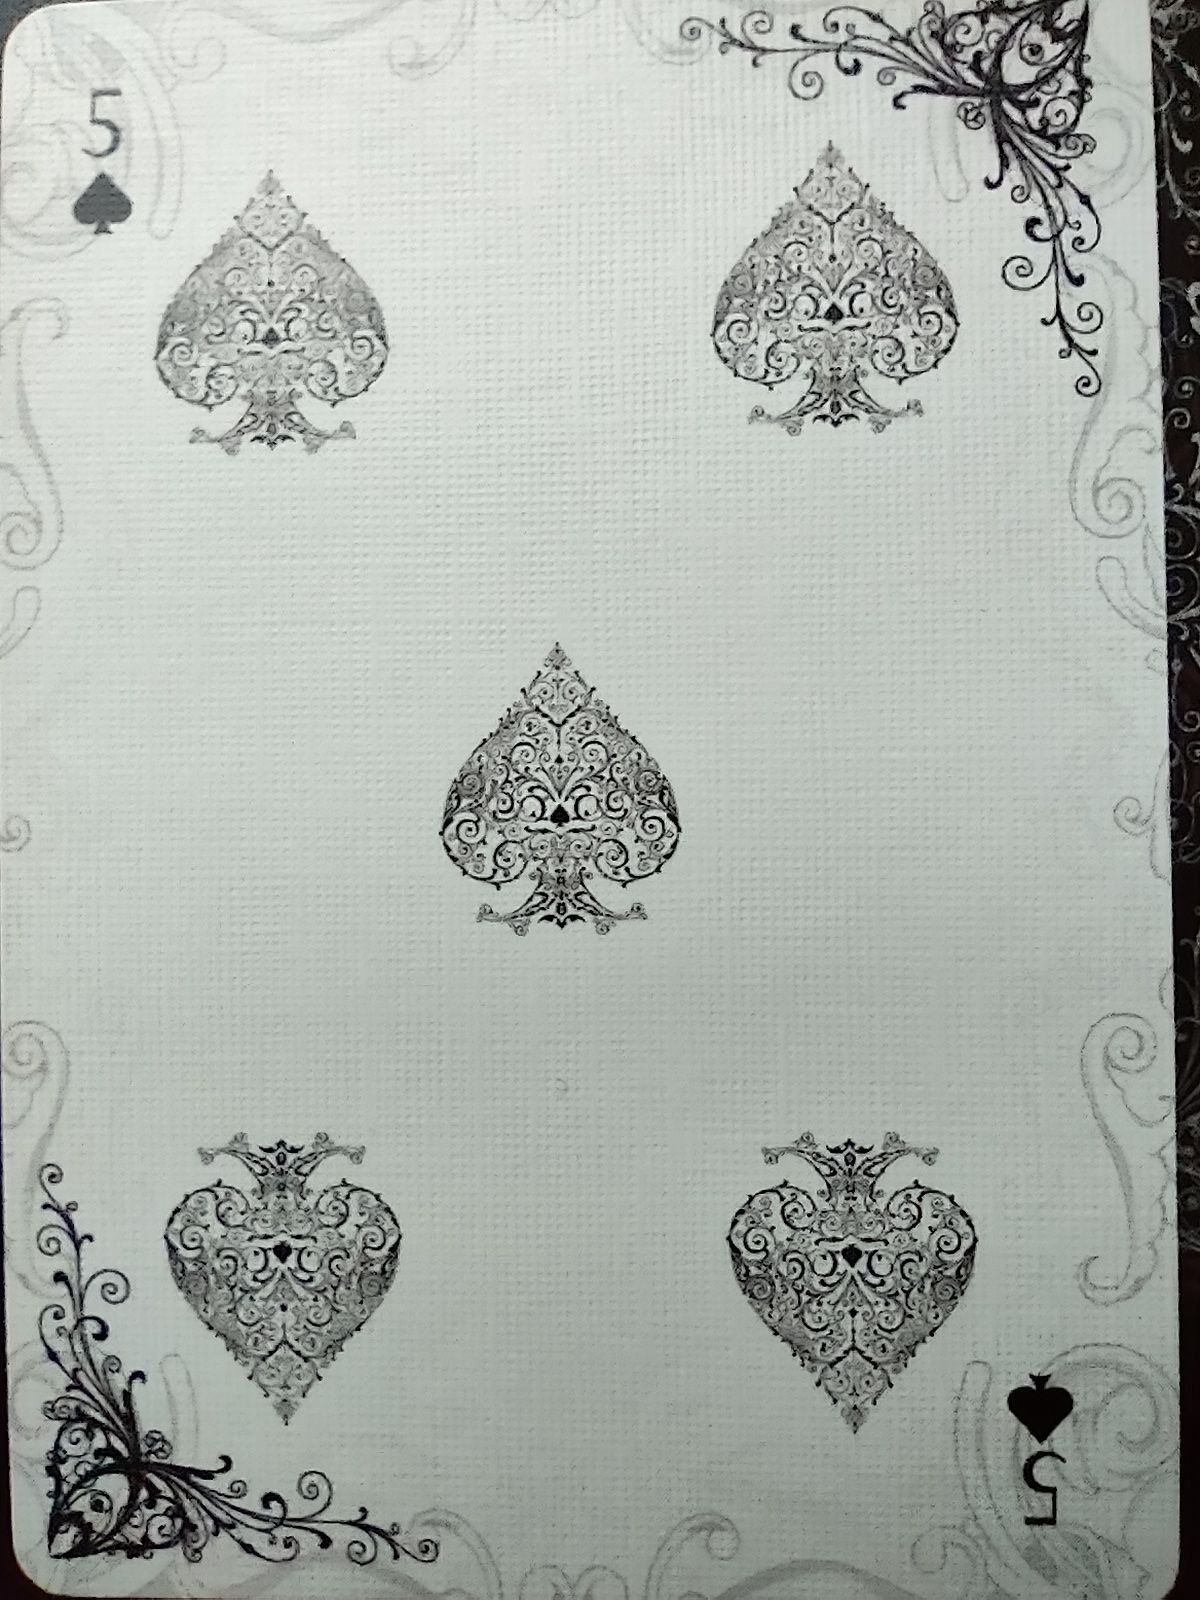 5 of spades. From the Divine deck by Bicycle.